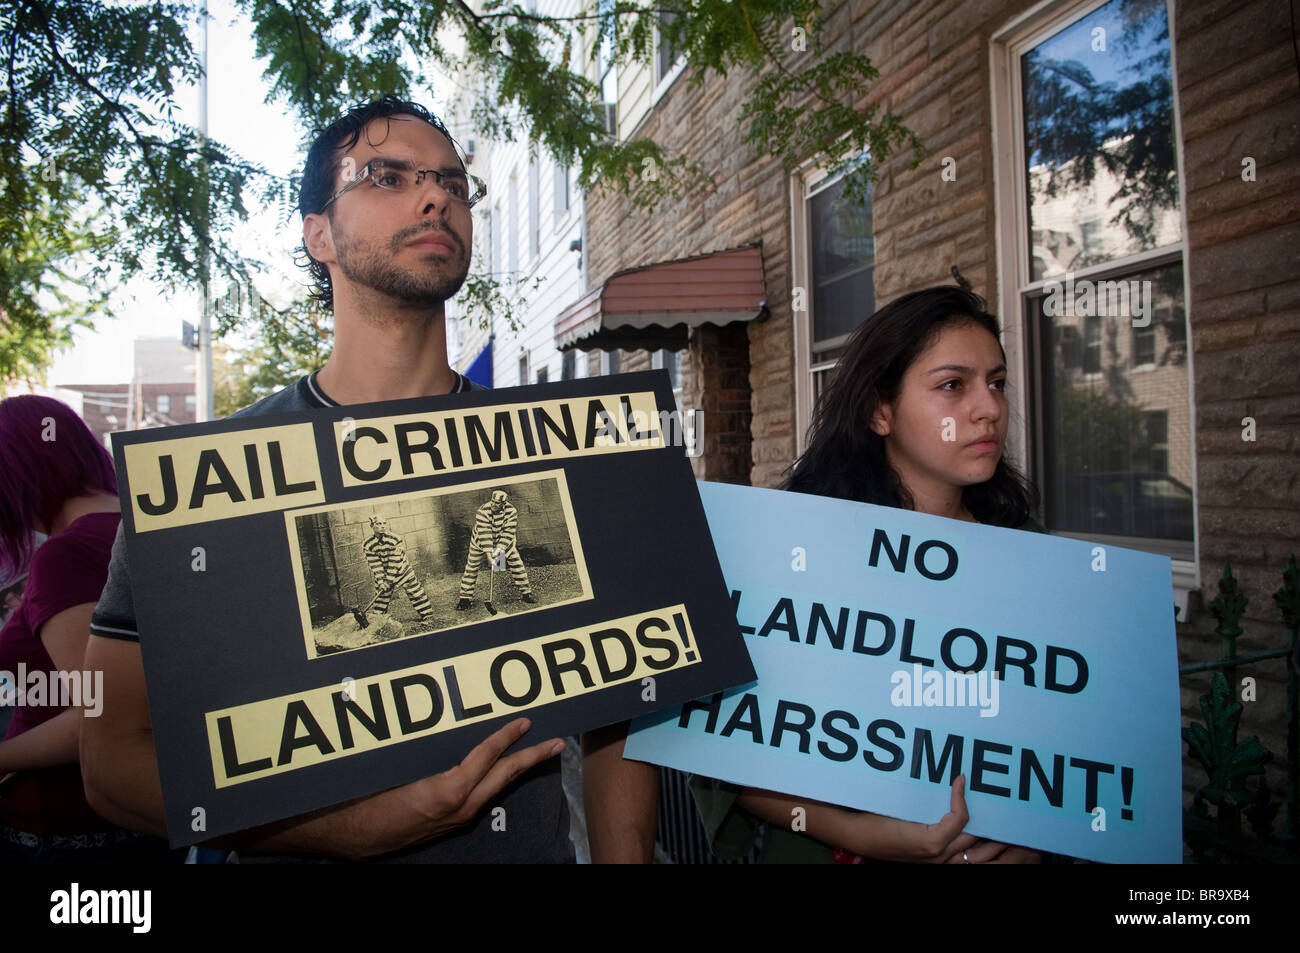 March and rally against landlords using allegedly illegal tactics to get rid of low income tenants in Brooklyn, New York Stock Photo